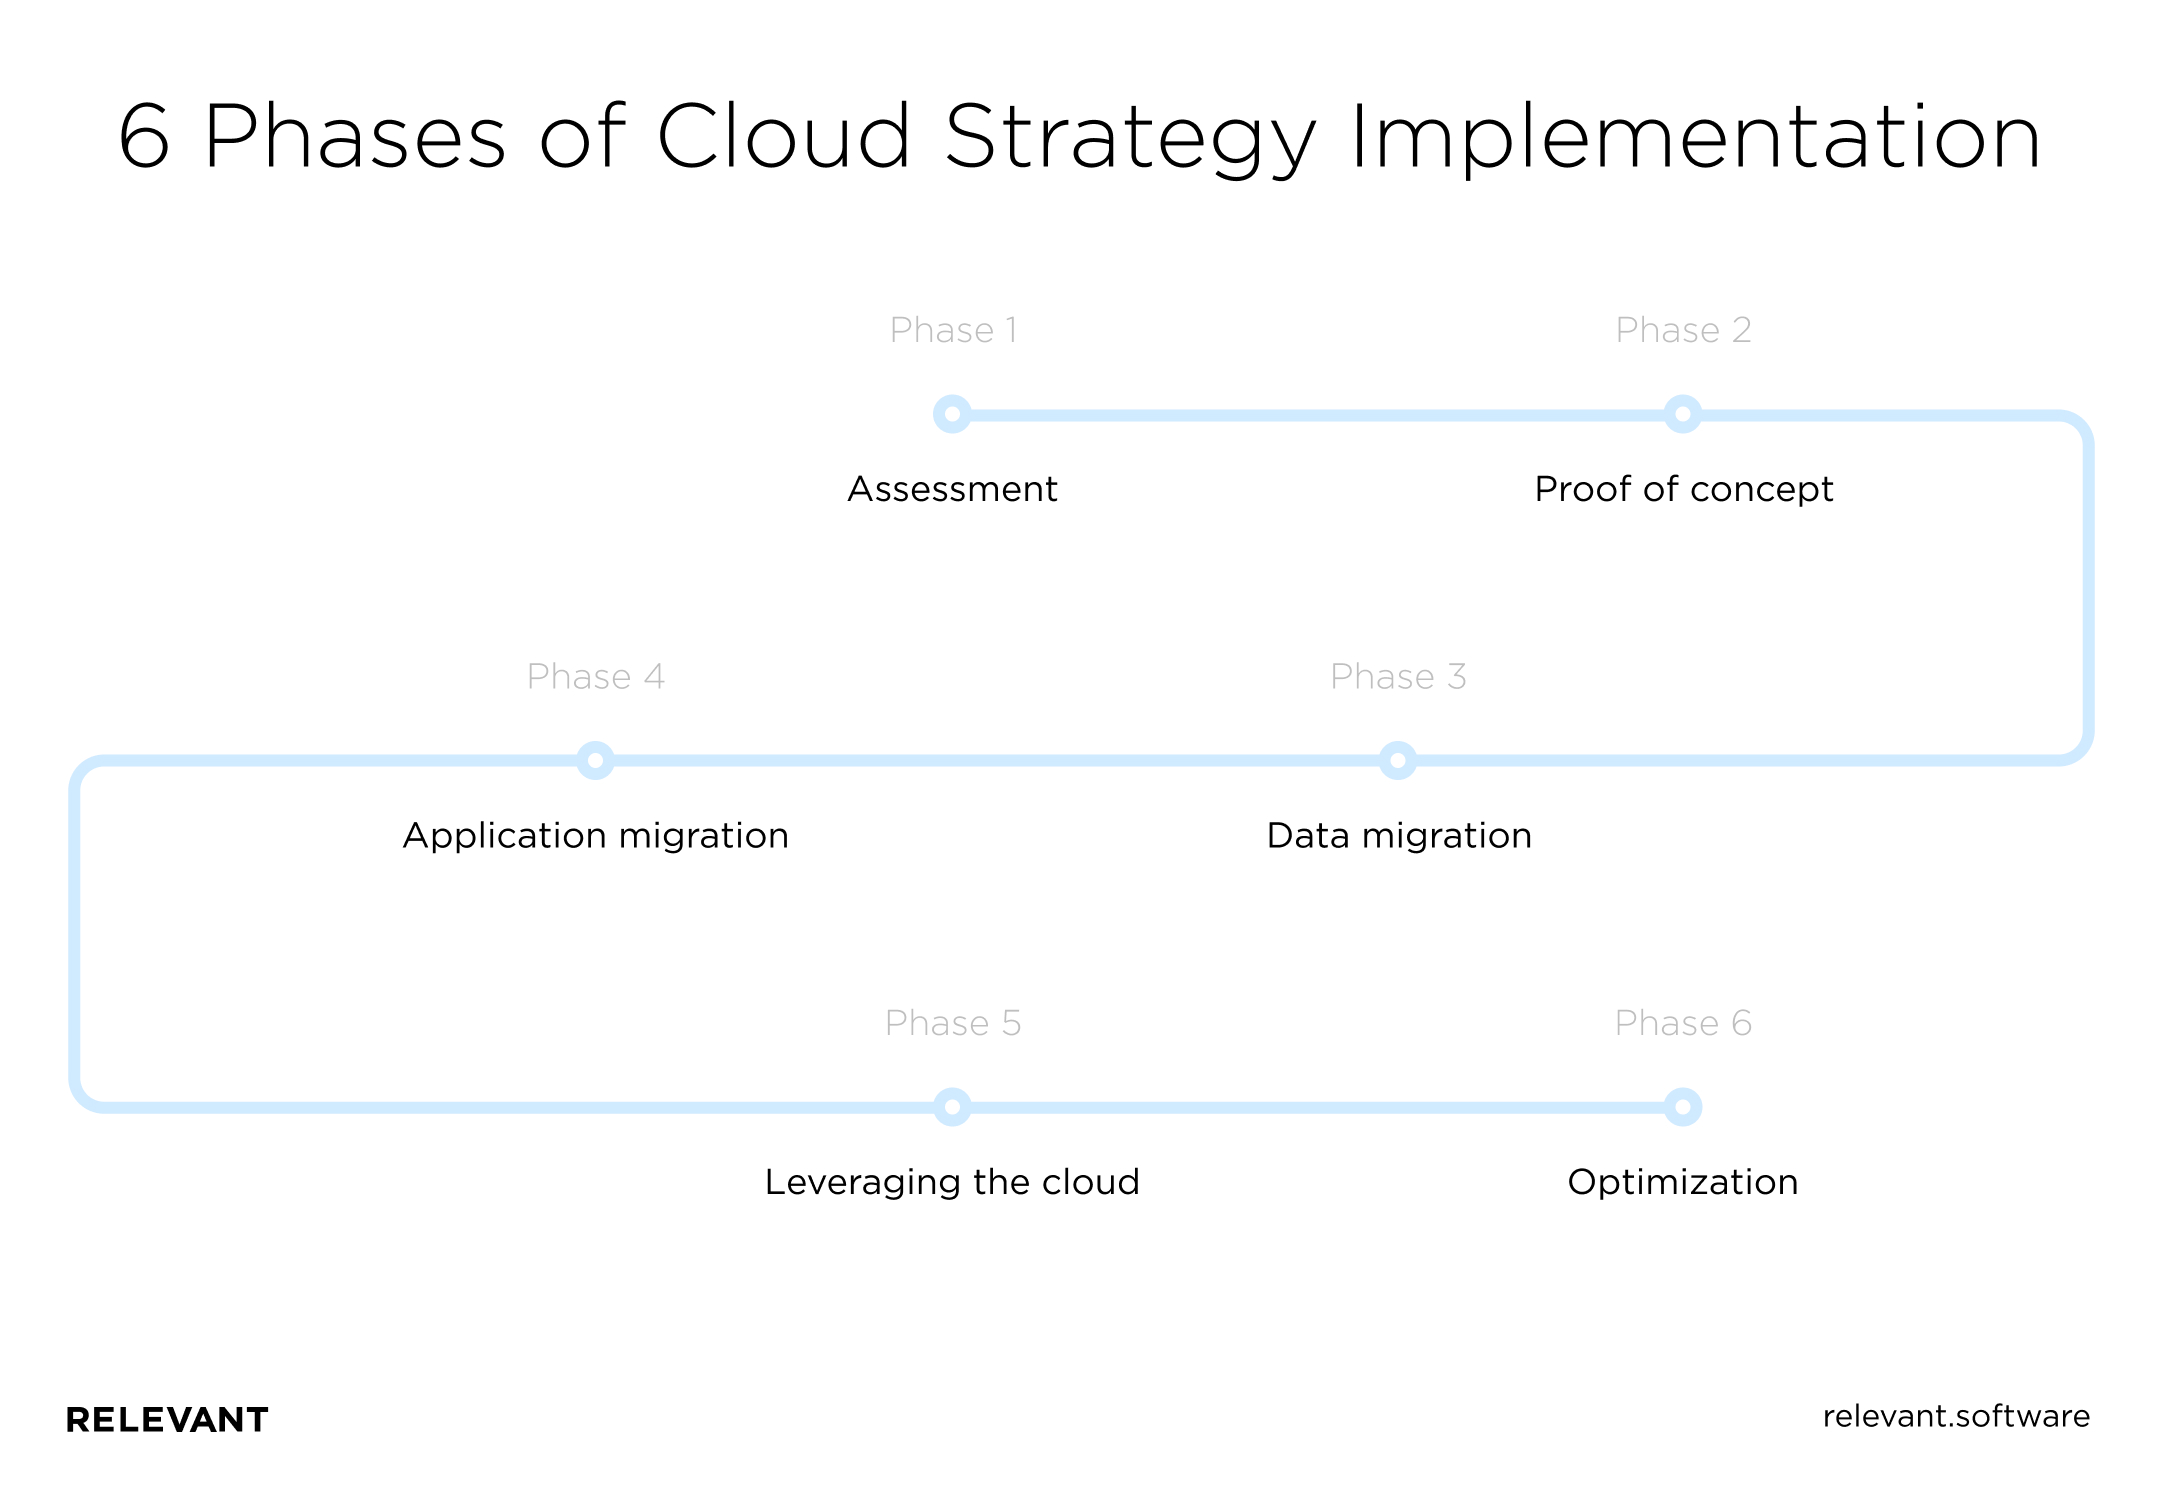 6 Phases of Cloud Strategy Implementation
Assessment